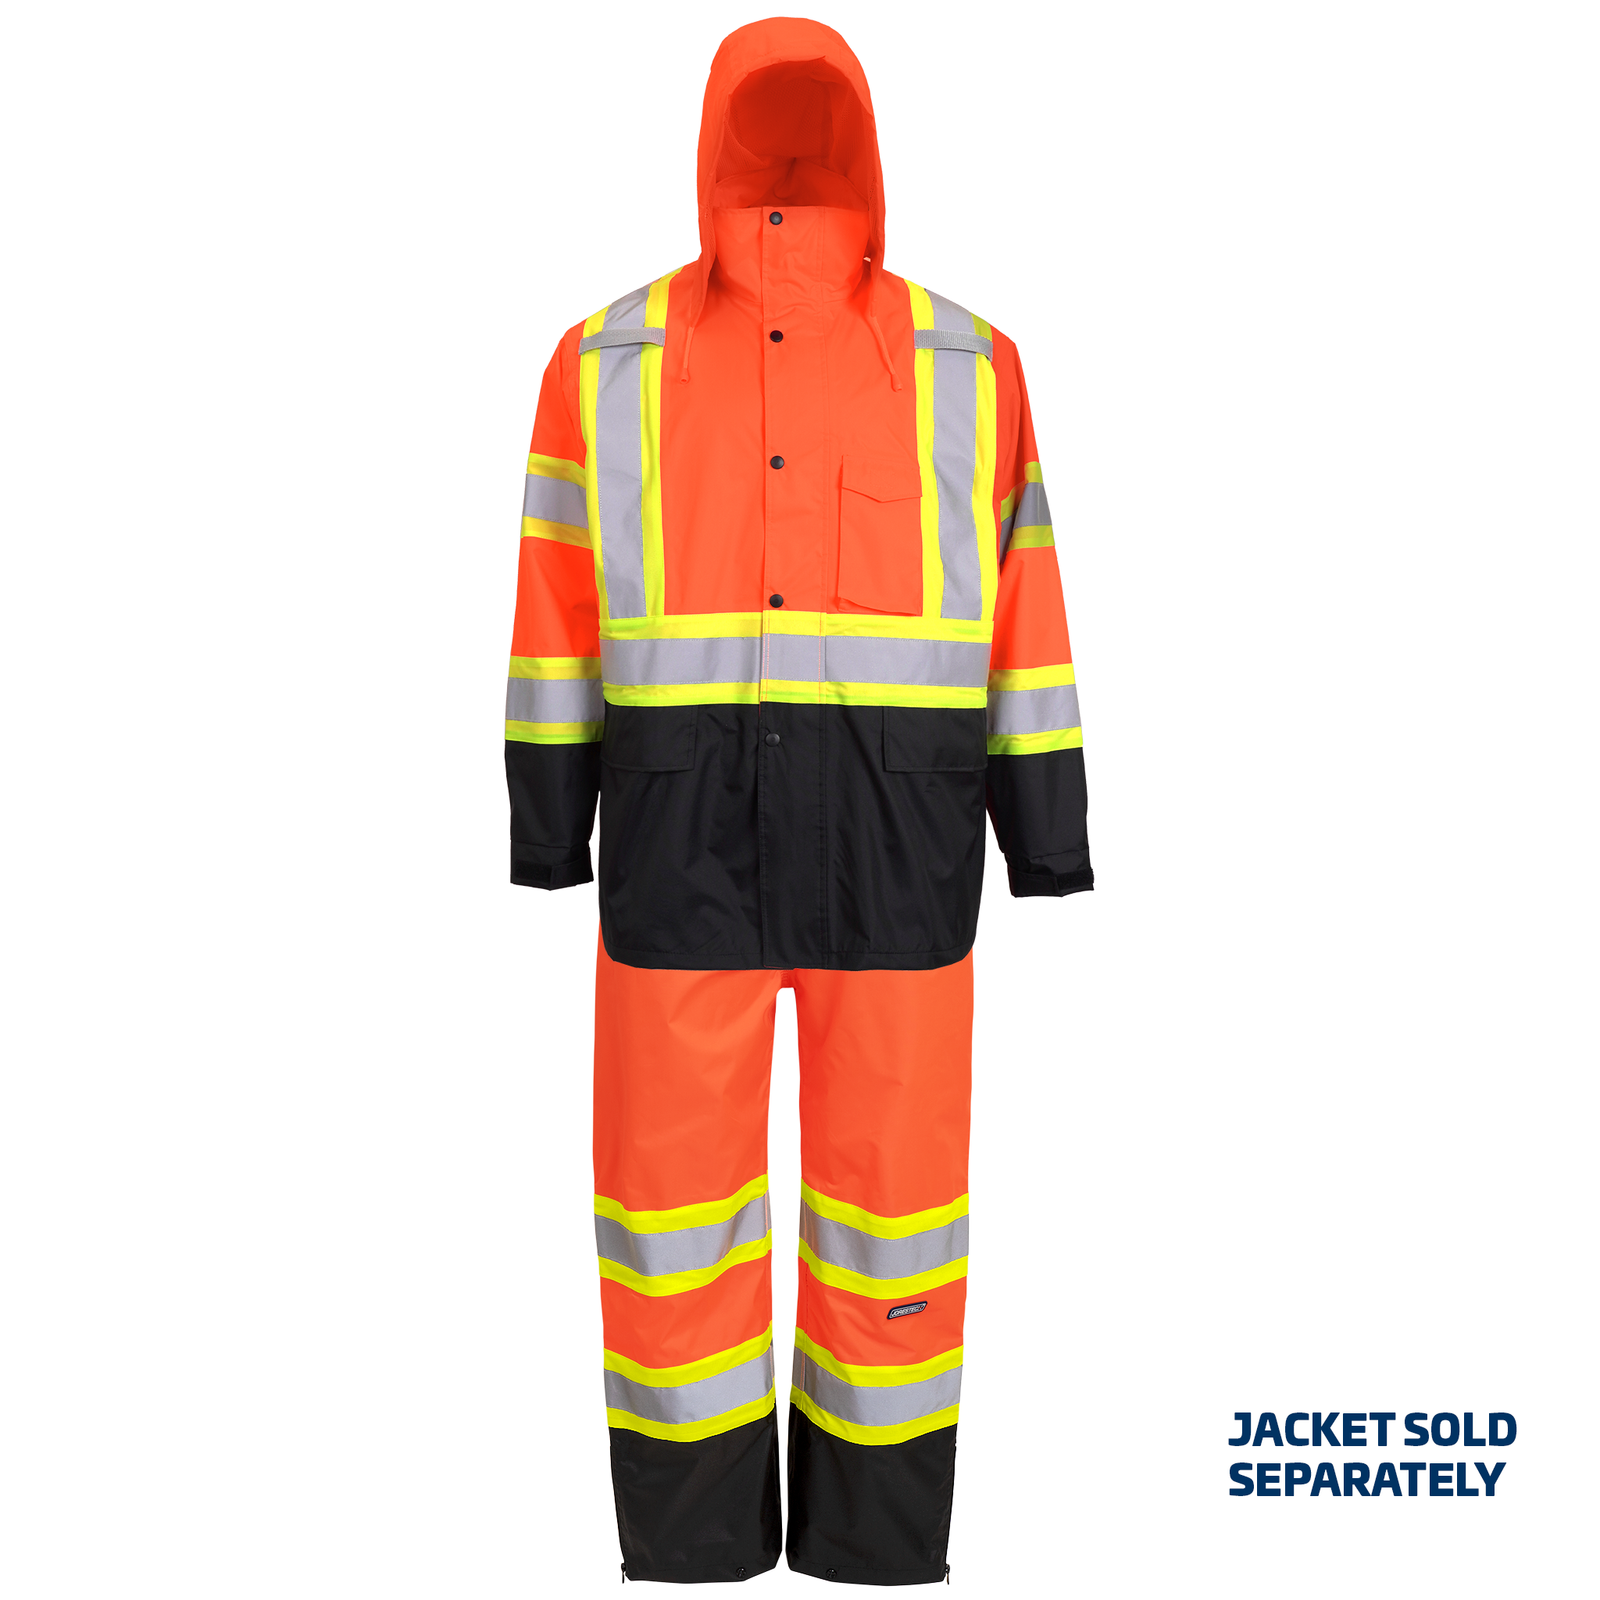 Hi vis orange safety rain pants and jacket with reflective stripes. Safety Jacket is sold separately